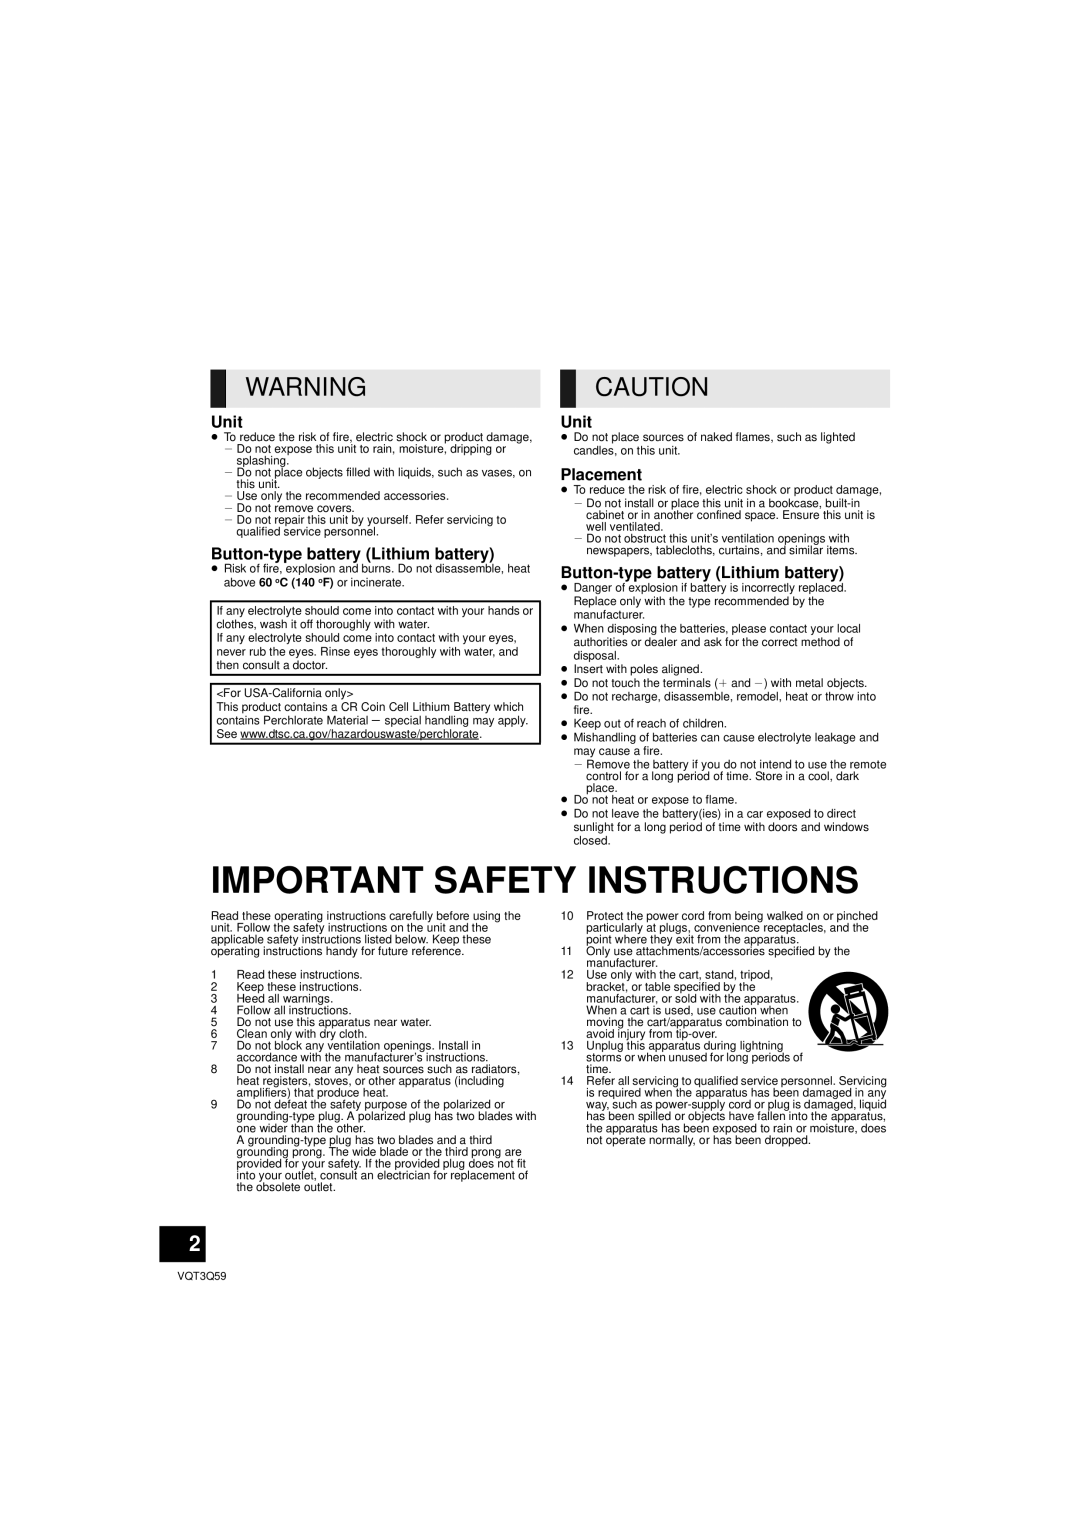 Panasonic SC-HTB15 owner manual Important Safety Instructions, Unit, Button-typebattery Lithium battery, Placement 